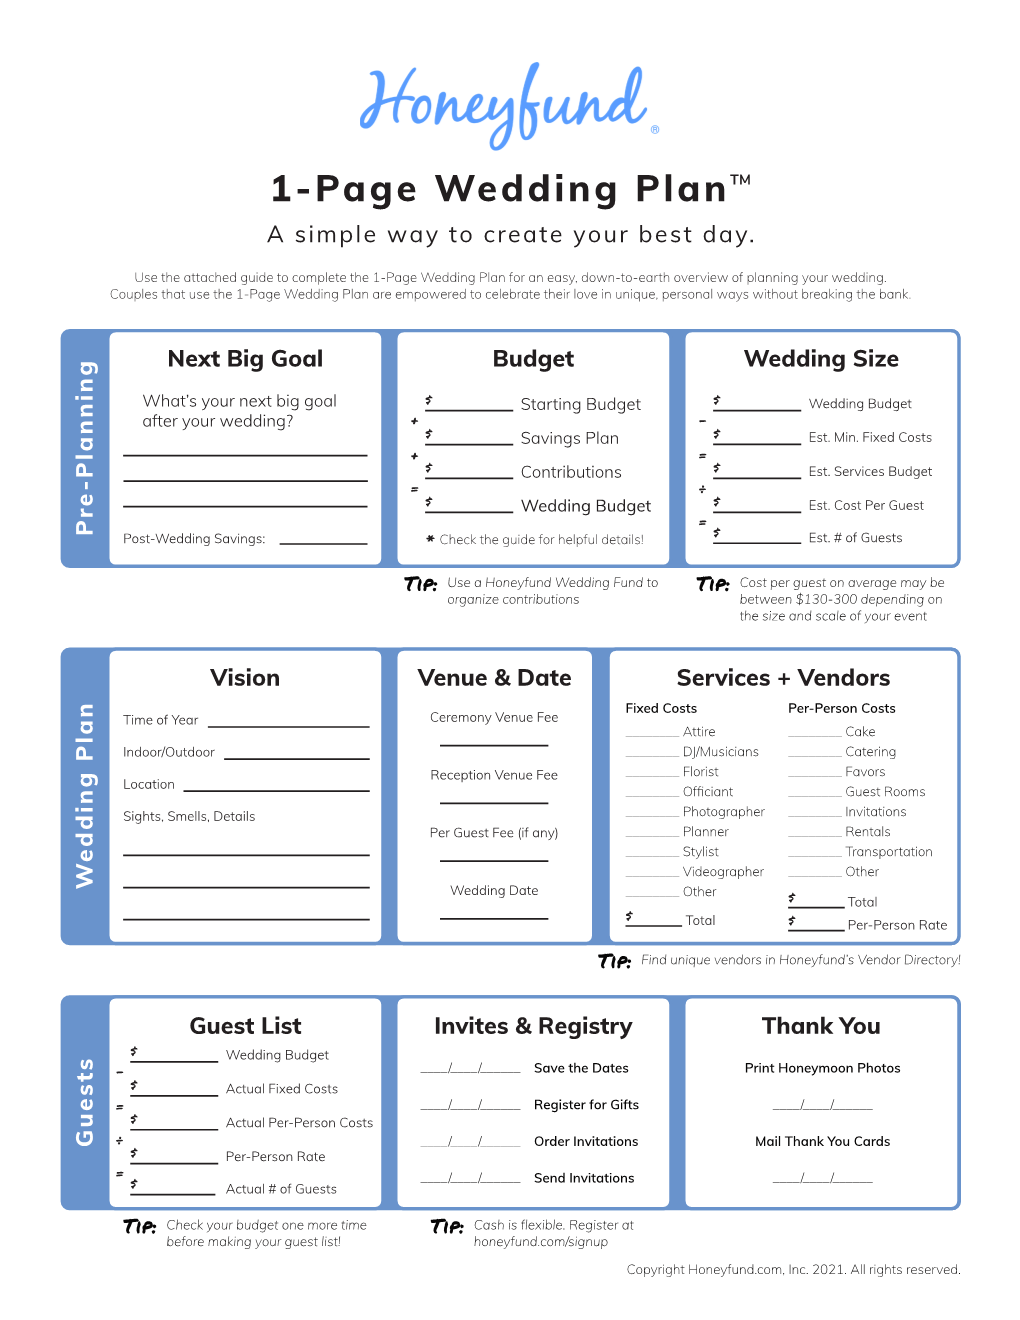 1-Page Wedding Plan™ a Simple Way to Create Your Best Day